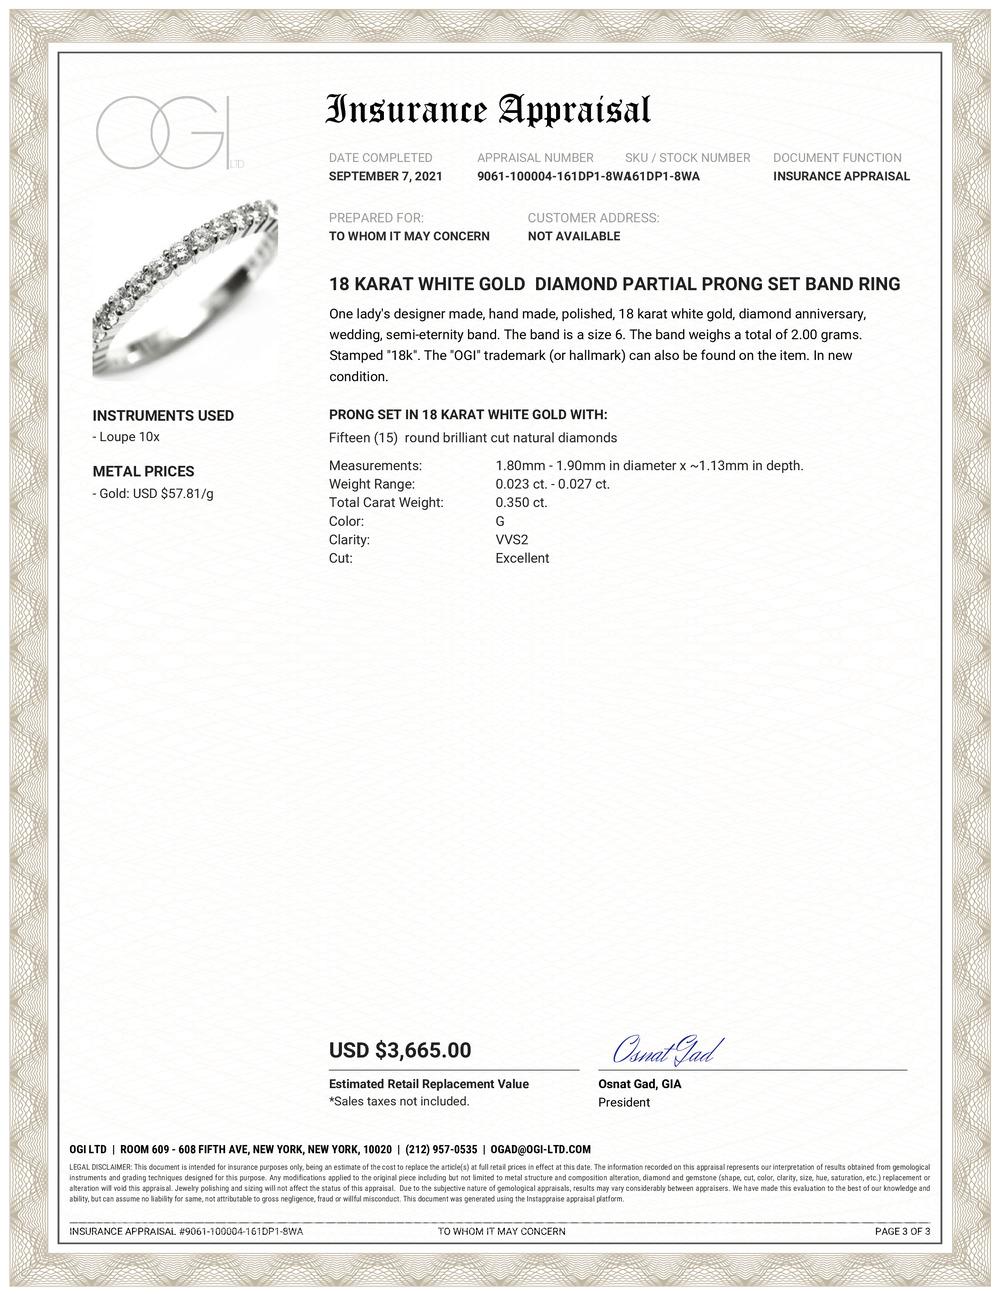 Eighteen karats white gold diamond prong set partial ring 
15 Diamonds weighing 0.35 carat 
2 millimeter wide
Anniversary or stacking band
Diamond quality G VS
New Ring
Ring size 6 in Stock
The ring can be resized 
Our collections challenge our